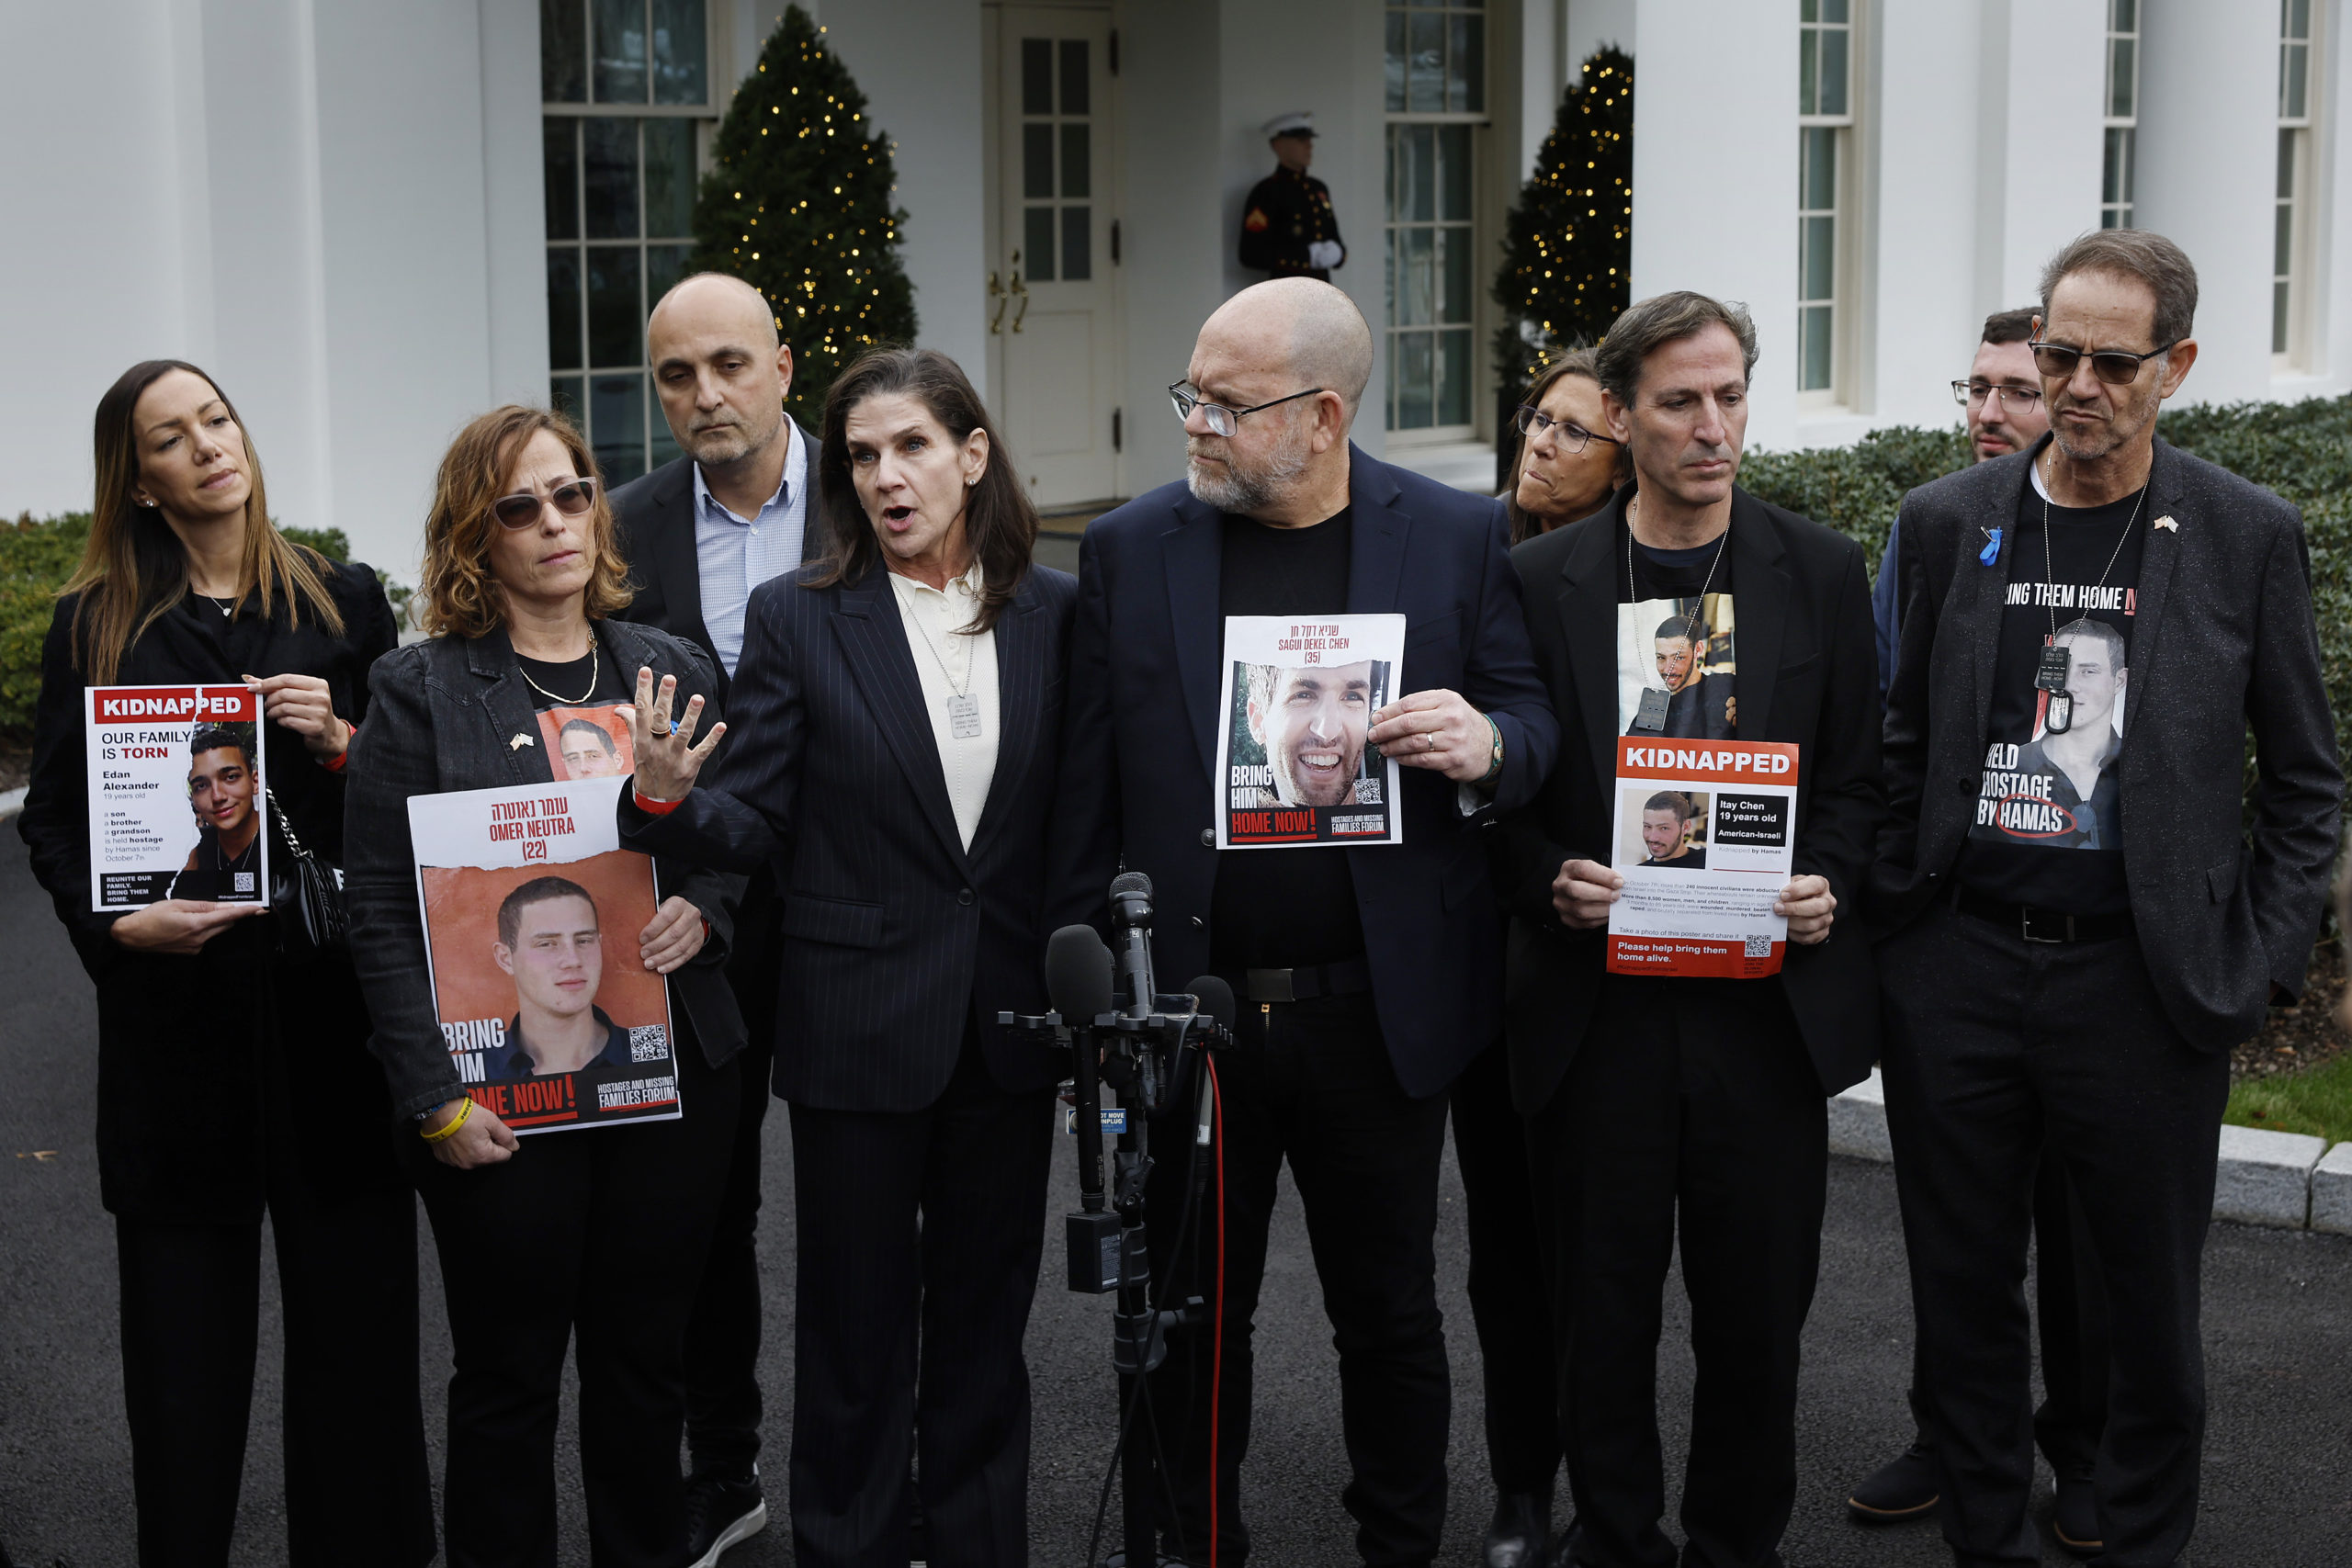 Family members of Americans who were taken hostage by Hamas during the terrorist attacks in Israel on October 7, including (R-L) Ronen Neutra, Ruby Chen, Jonathan Dekel-Chen, Liz Naftali, Adi Alexander, Orna Neutra, and Yael Alexander talk to reporters outside the West Wing of the White House on December 13, 2023 in Washington, DC. The families were invited to a private meeting with U.S. President Joe Biden and Secretary of State Antony Blinken. (Photo by Chip Somodevilla/Getty Images)